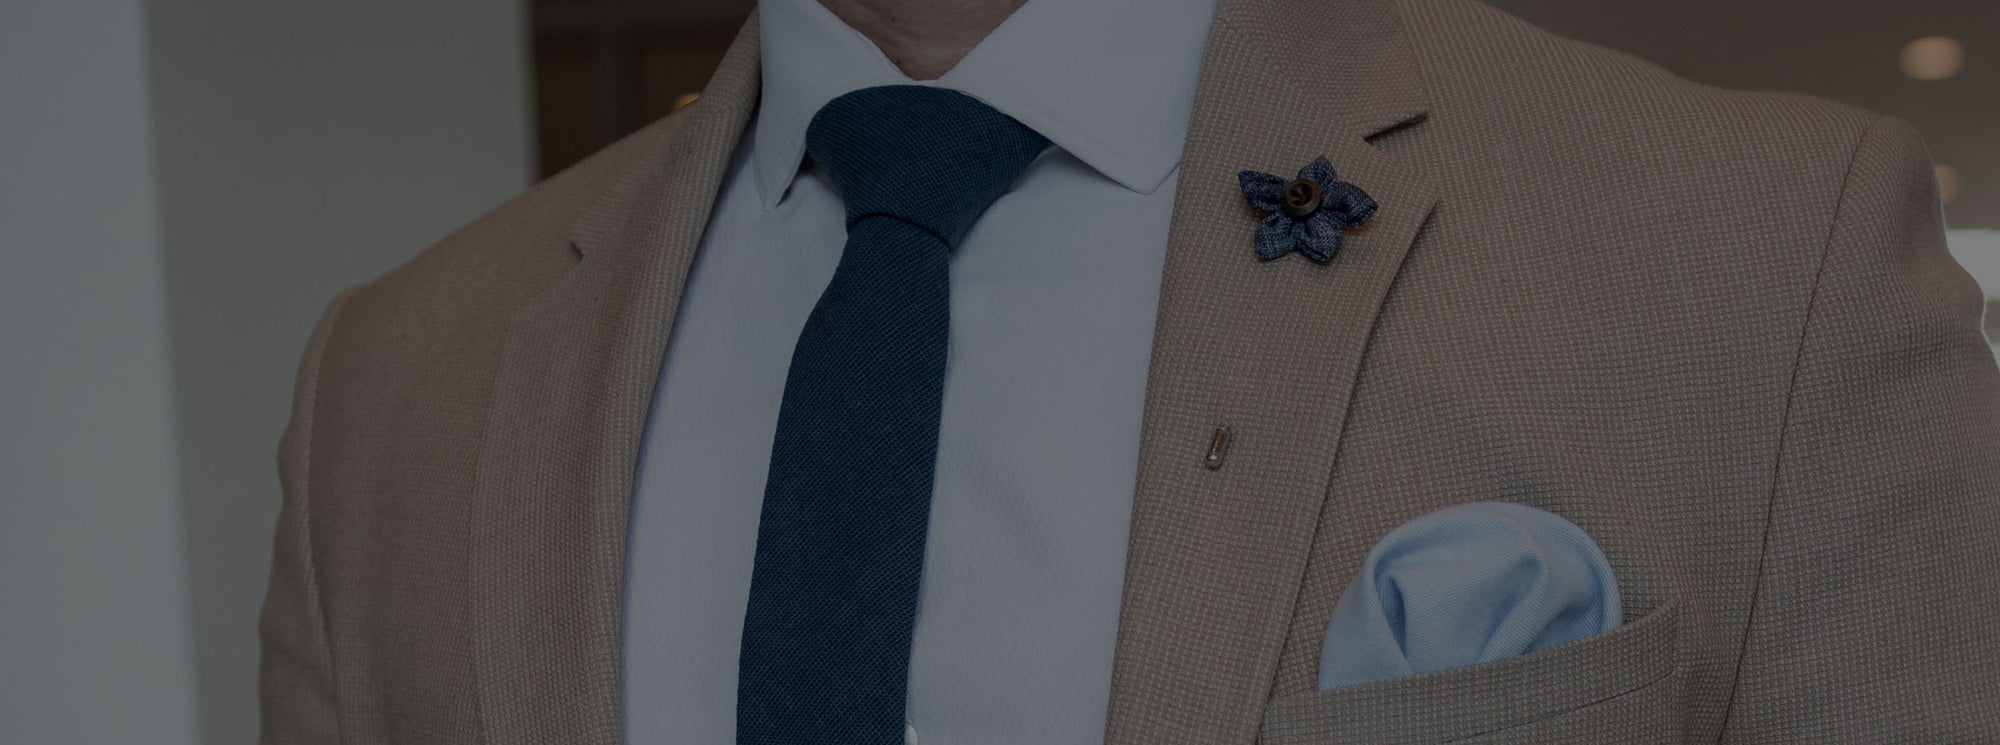 Tan suit with a blue lapel pin